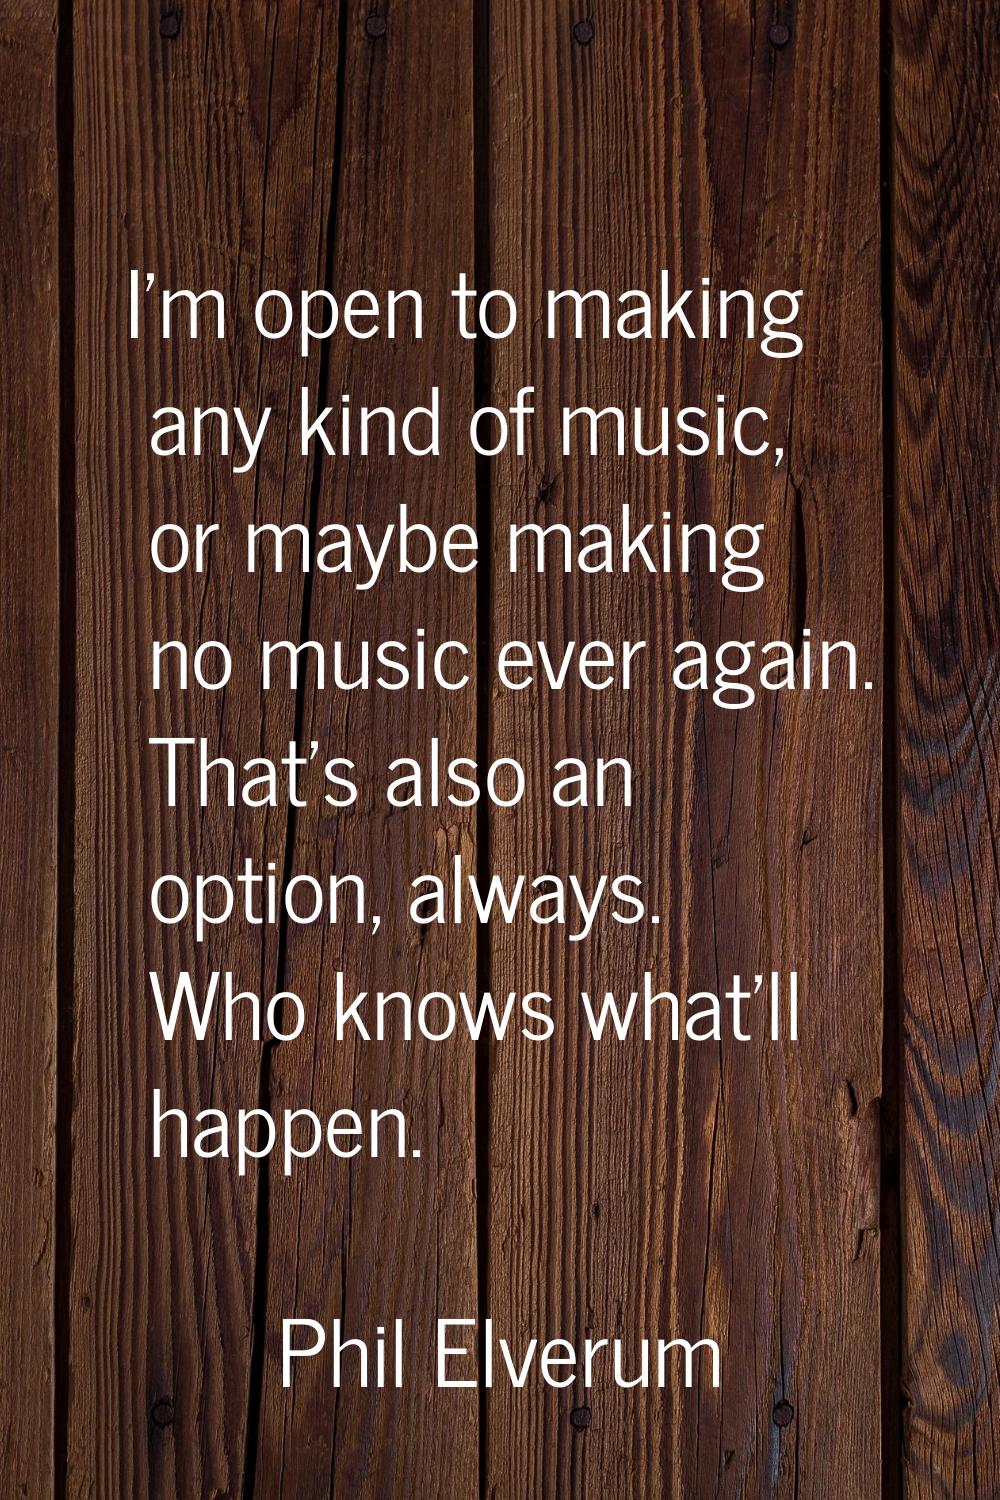 I'm open to making any kind of music, or maybe making no music ever again. That's also an option, a